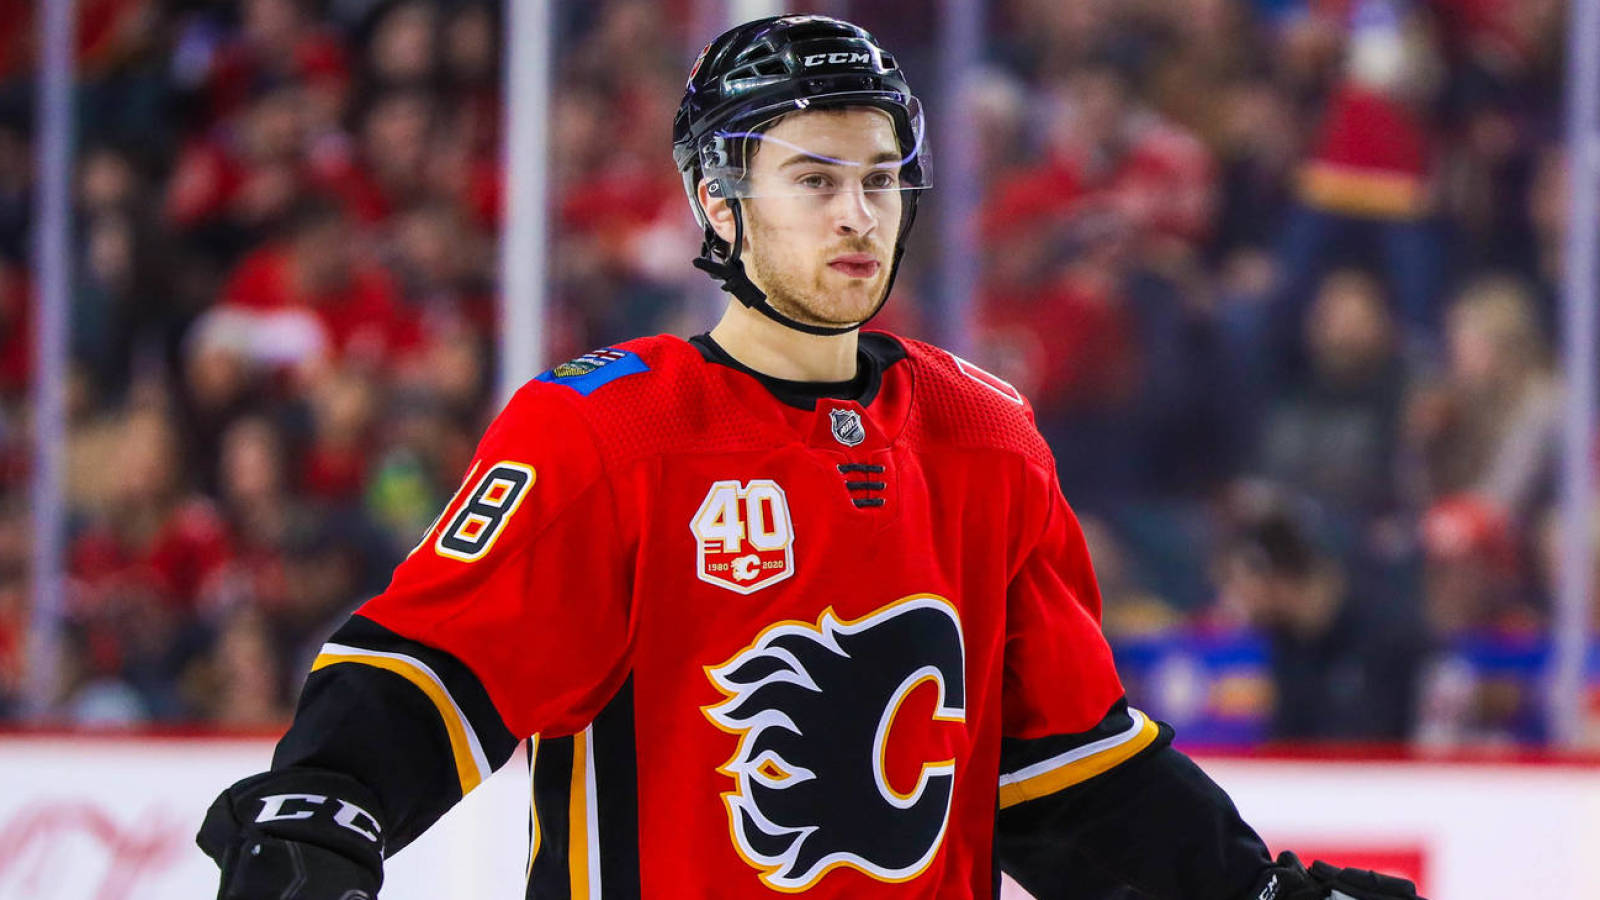 Flames' Mangiapane '100% fully healthy' after shoulder surgery